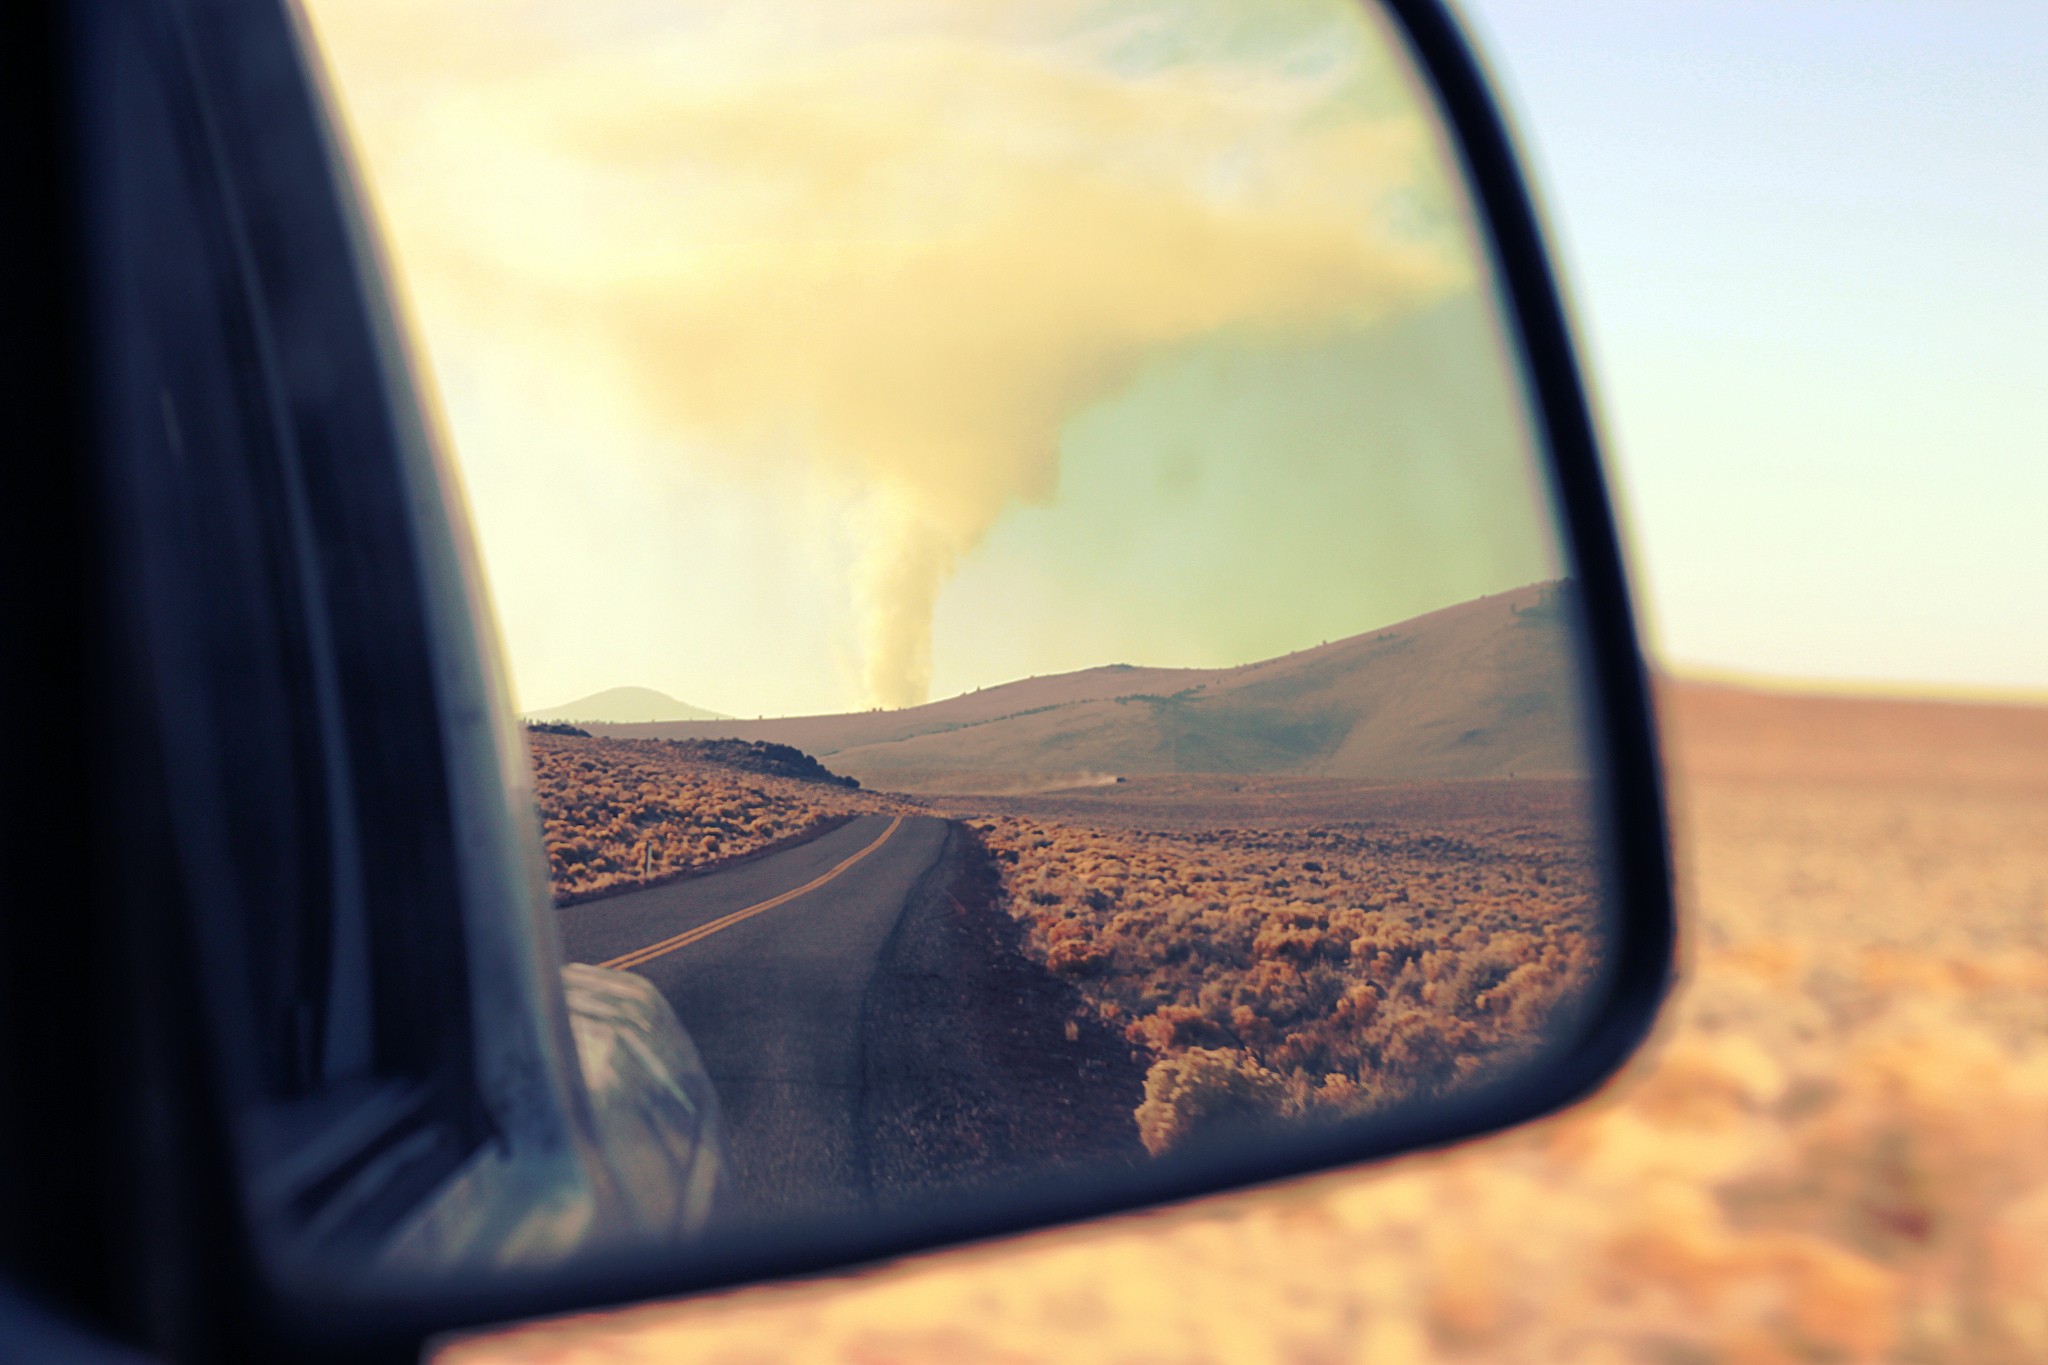 General 2048x1365 photography nature landscape rearview mirror mirror road car vehicle